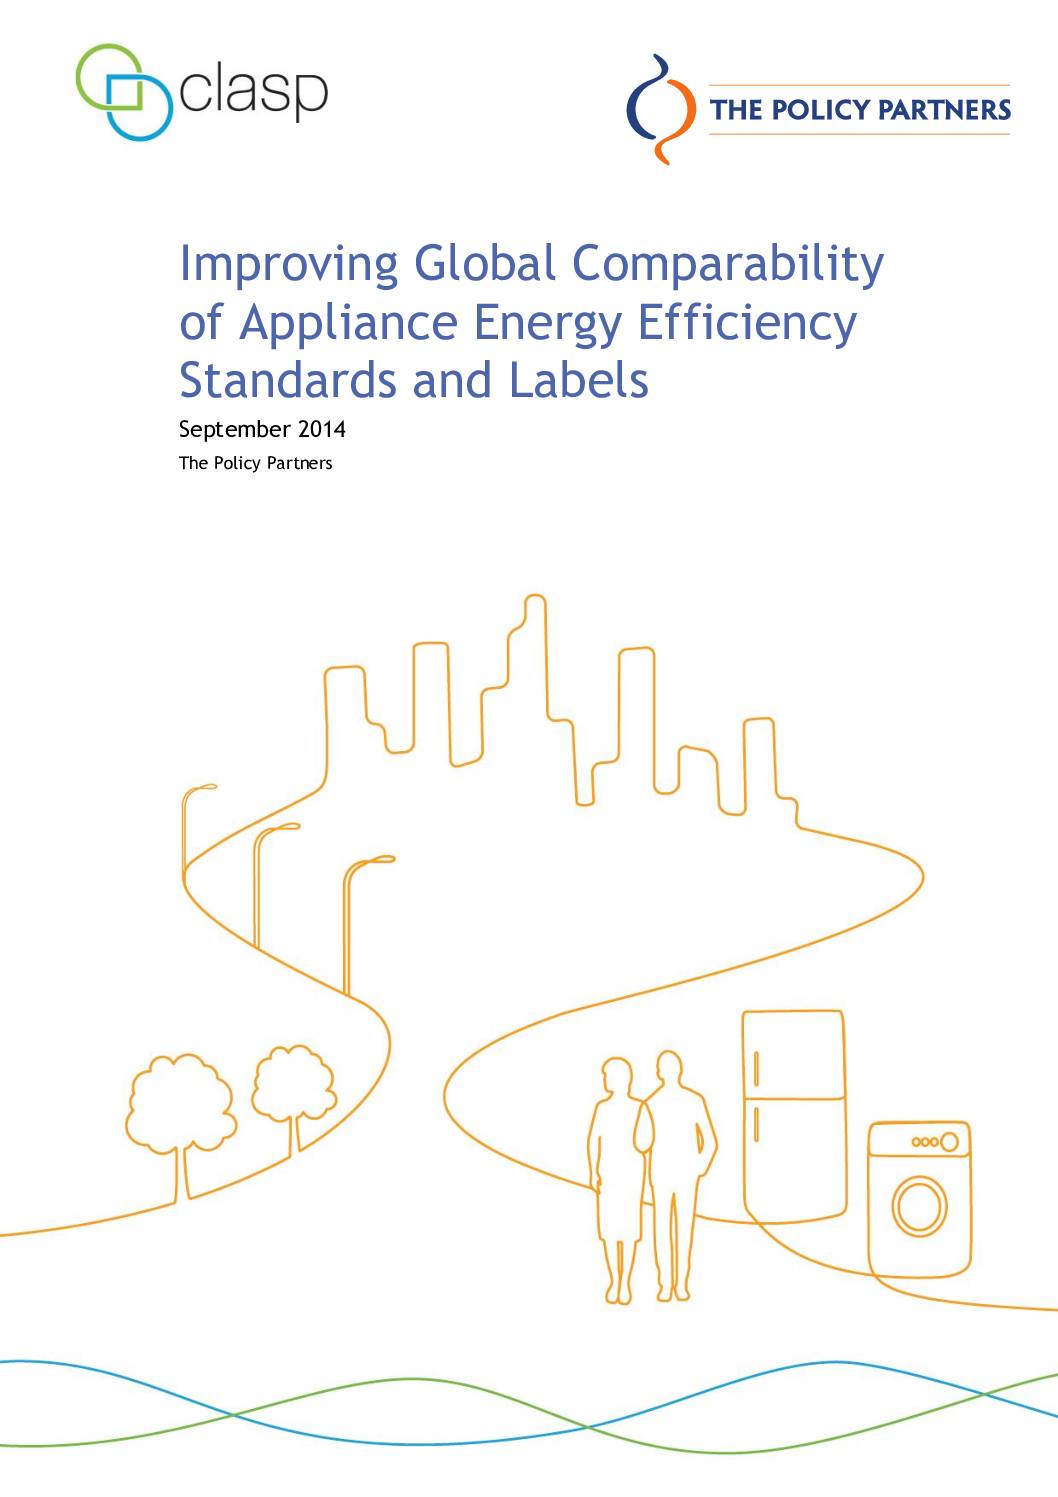 Improving Global Comparability of Appliance Energy Efficiency Standards and Labels